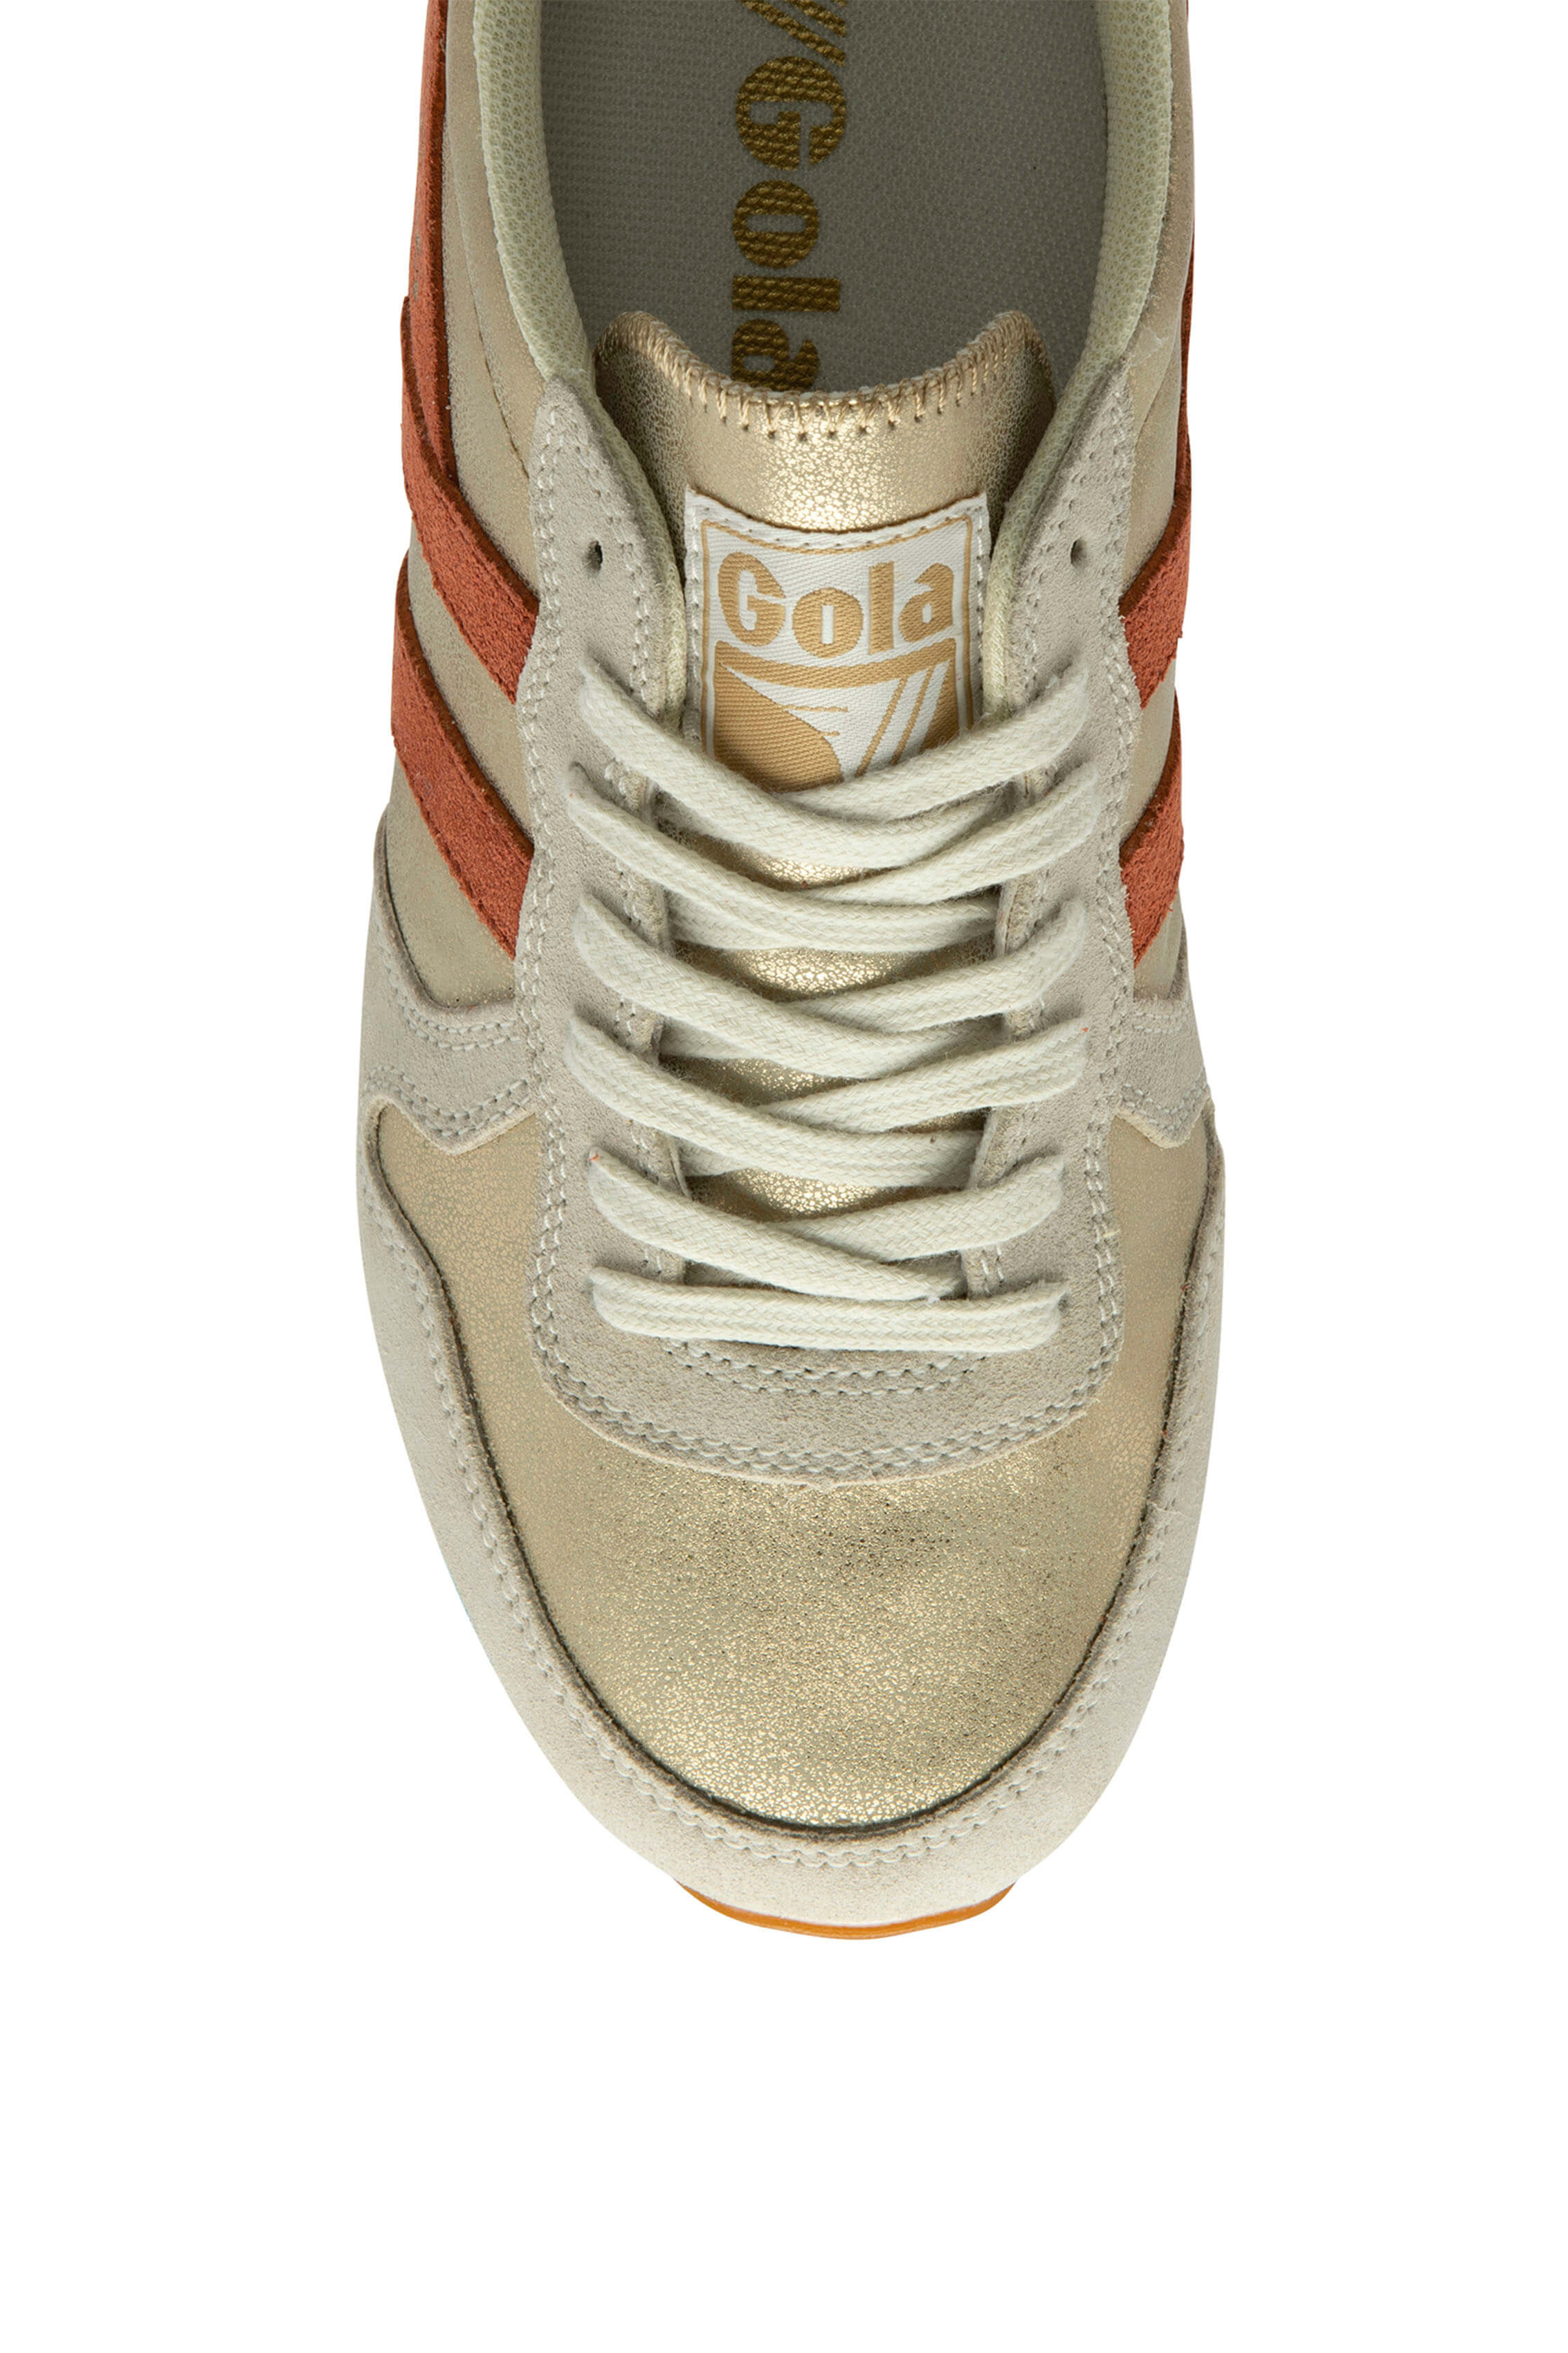 vintage inspired tennis shoes